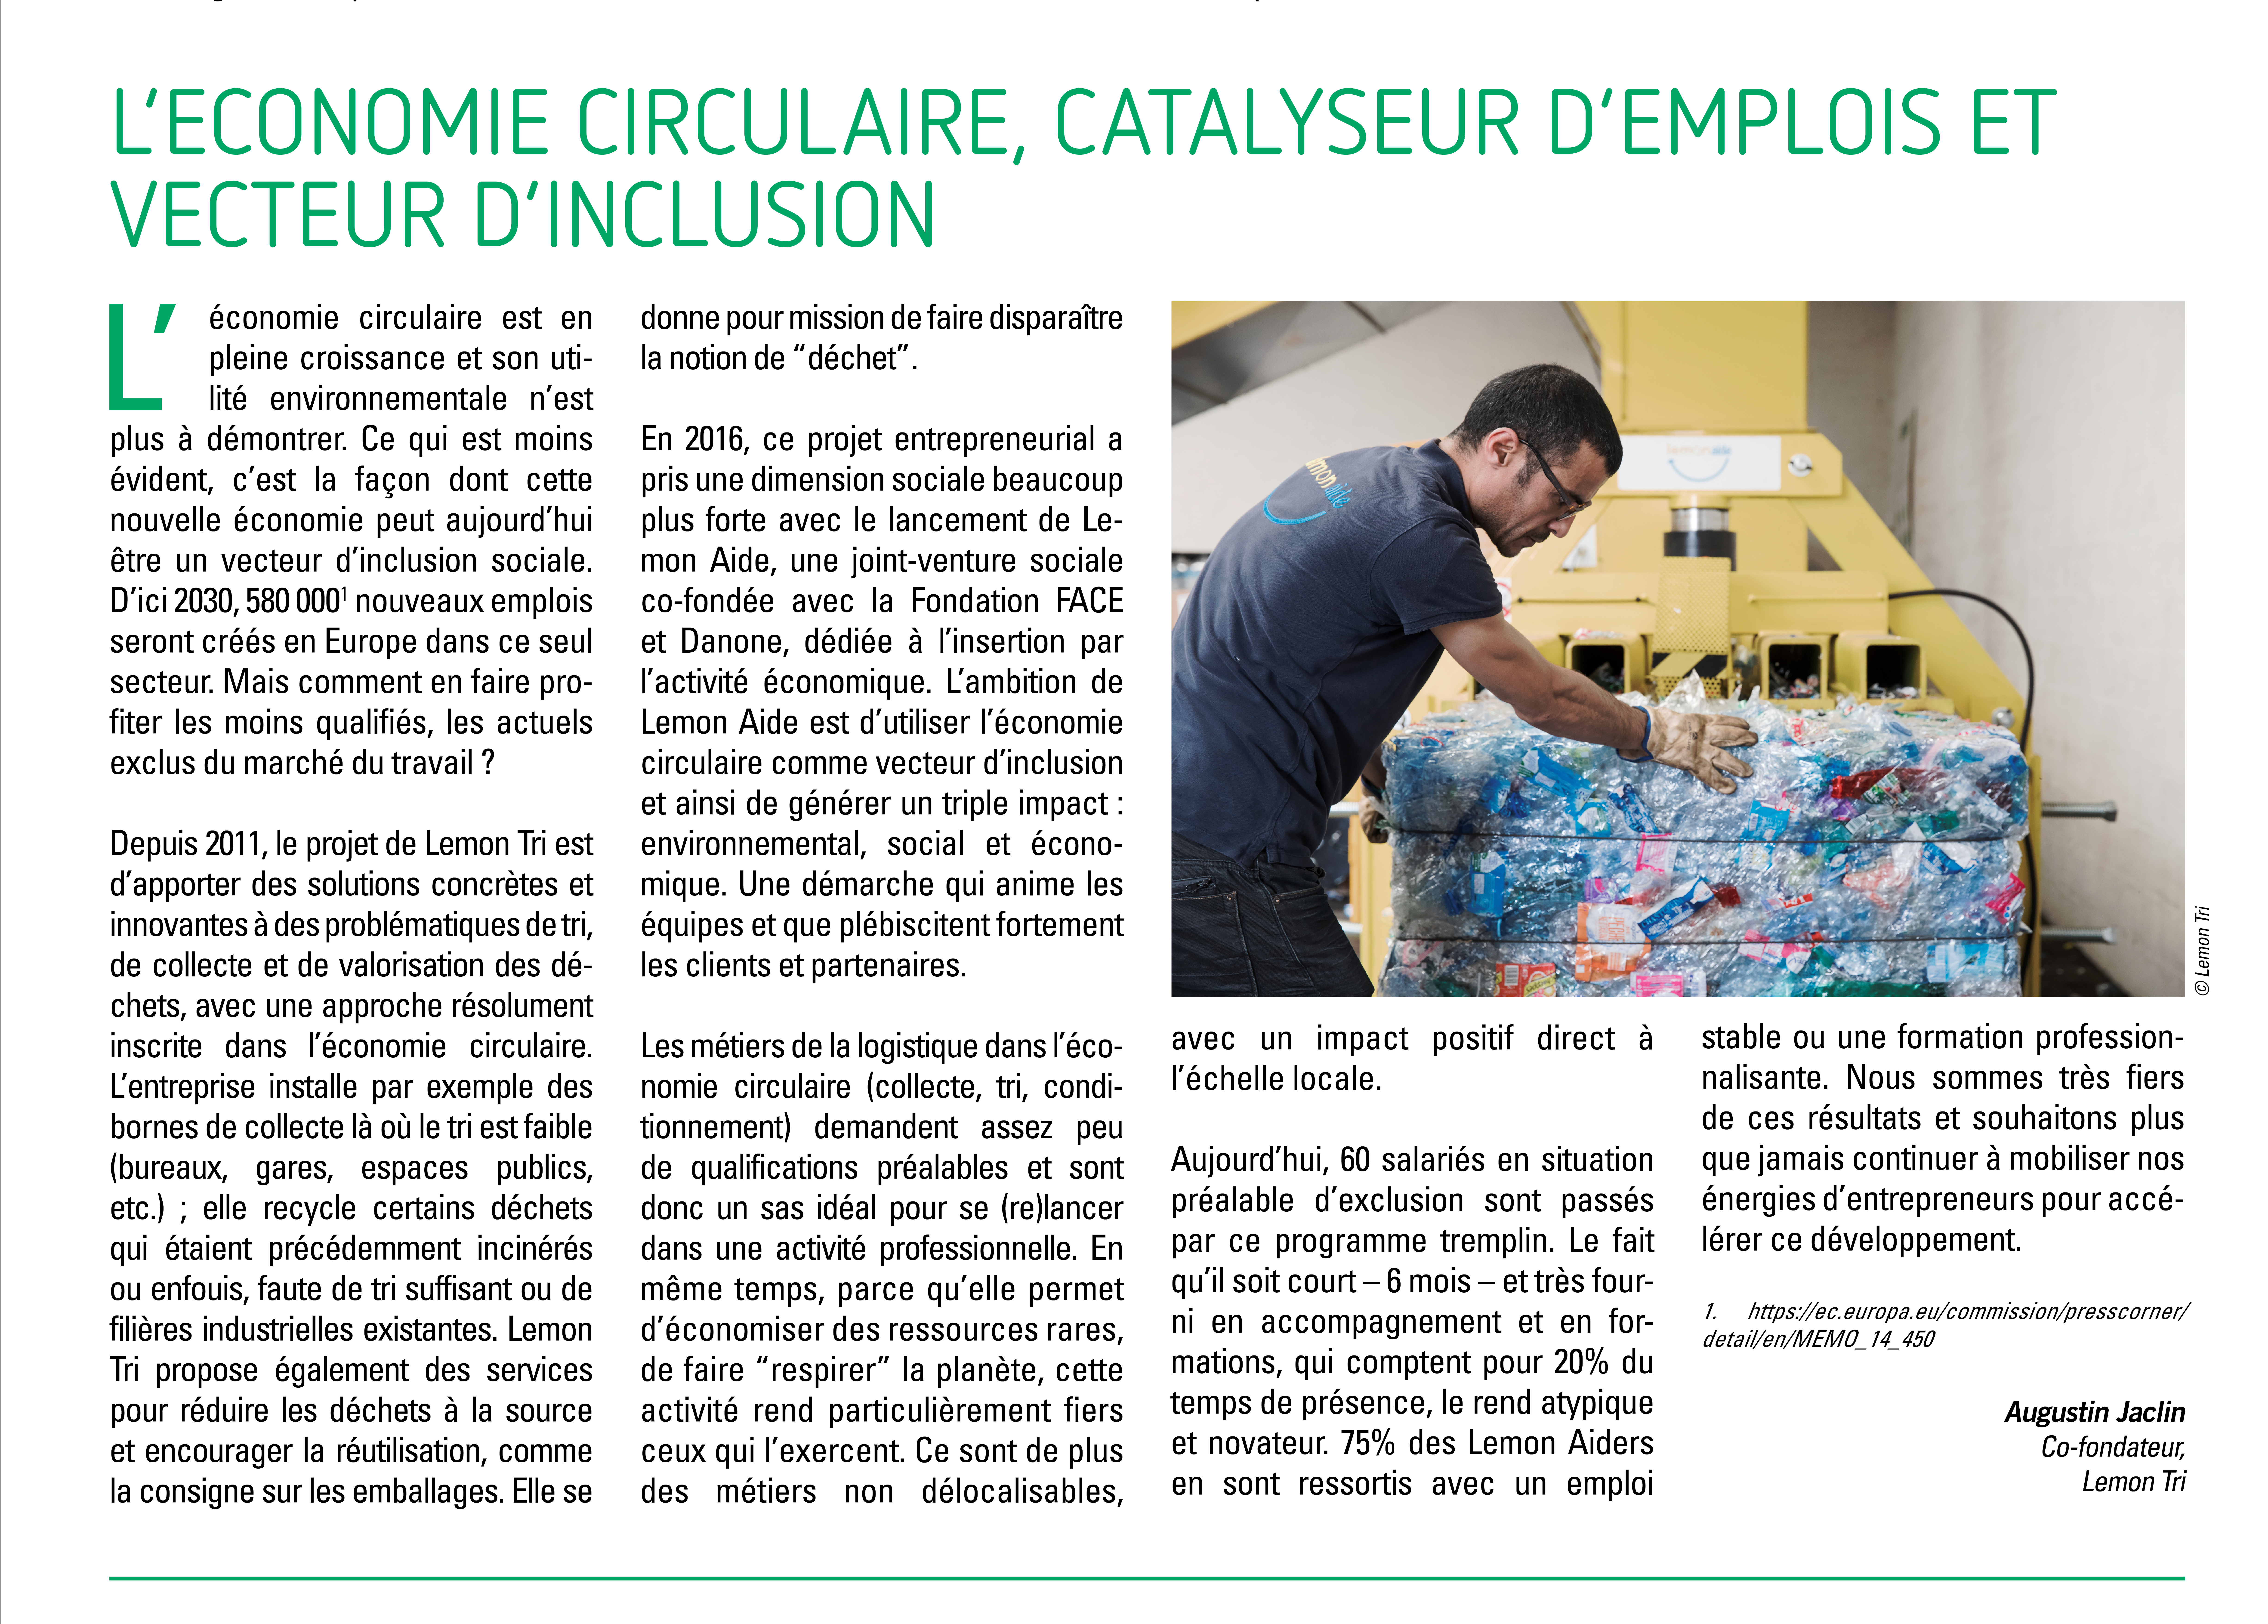 Circular economy a catalyst for employment and a vector for inclusion